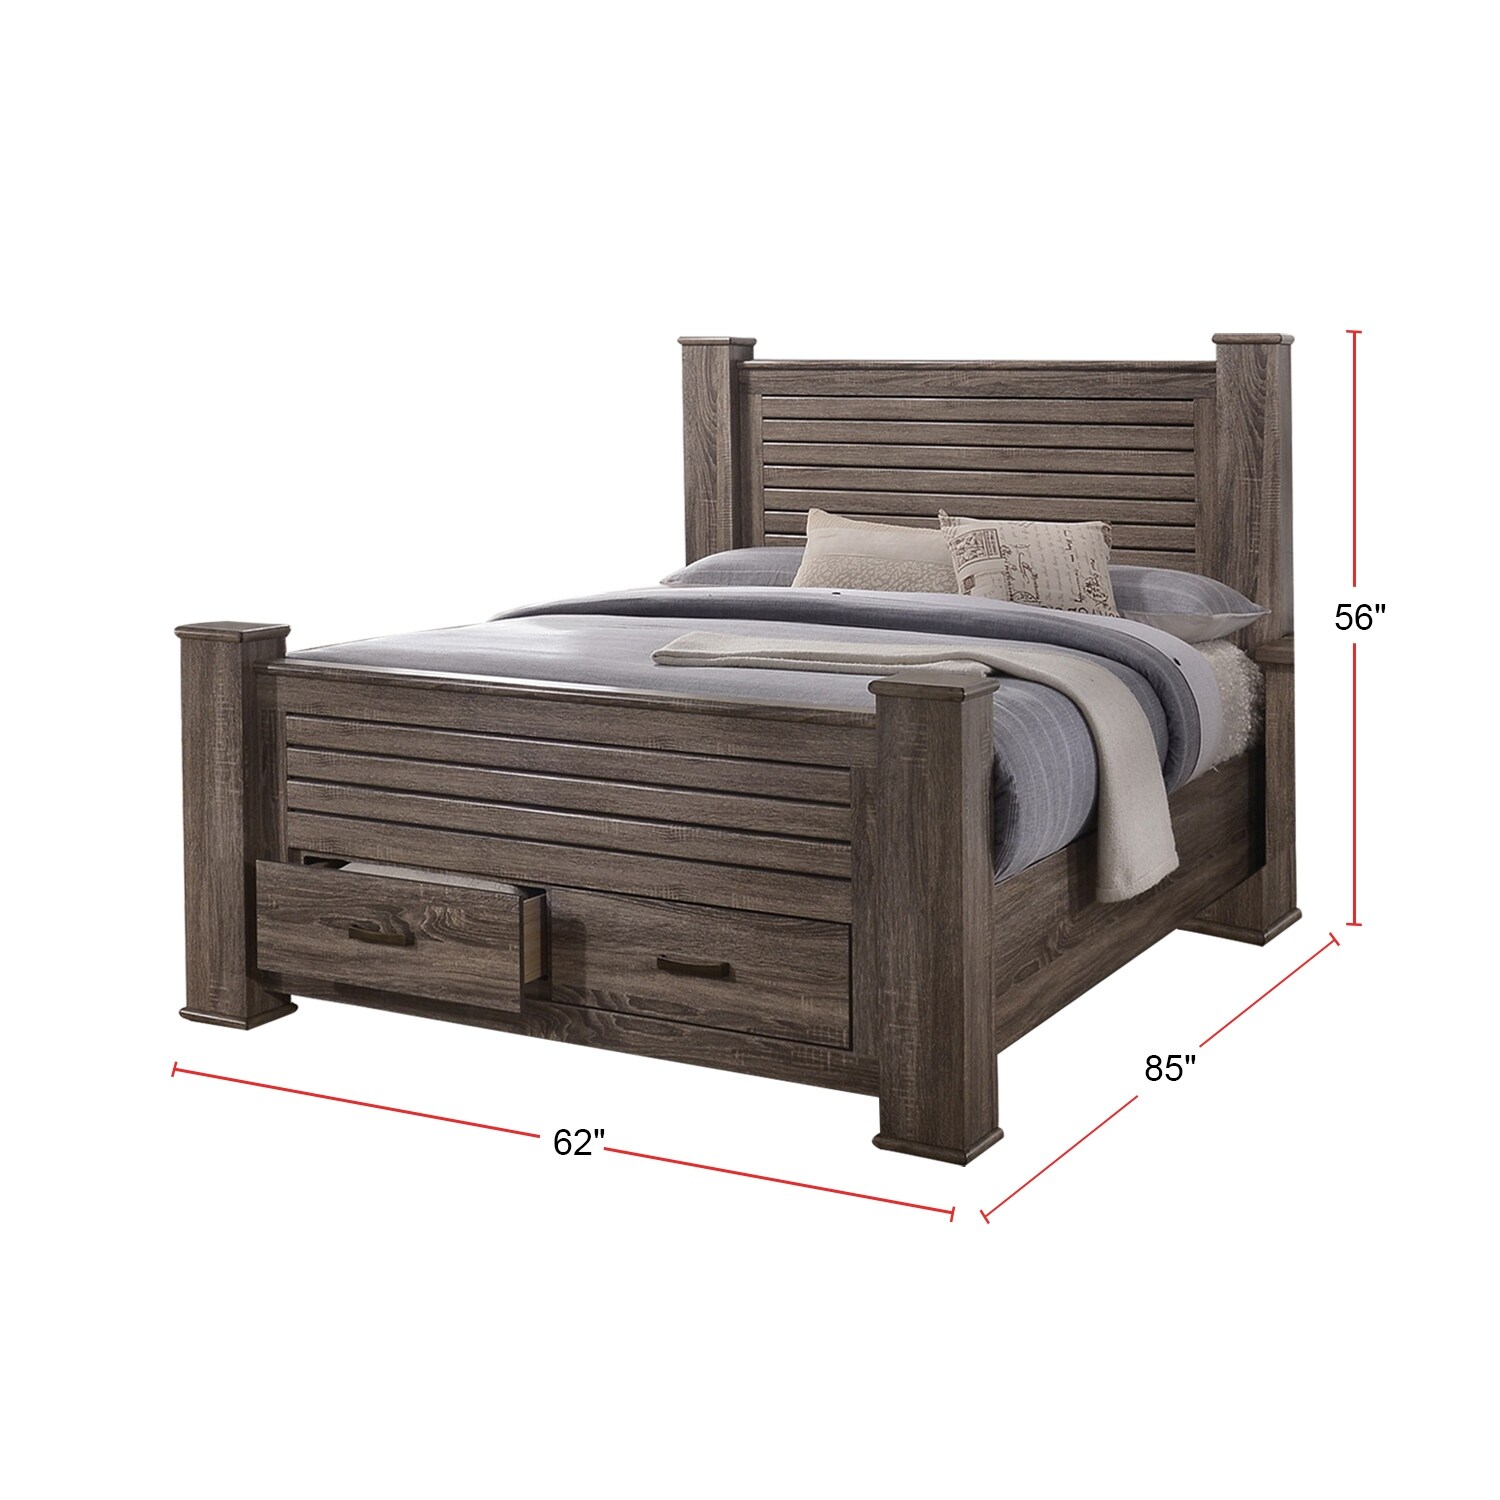 Wooden Bed With Drawers